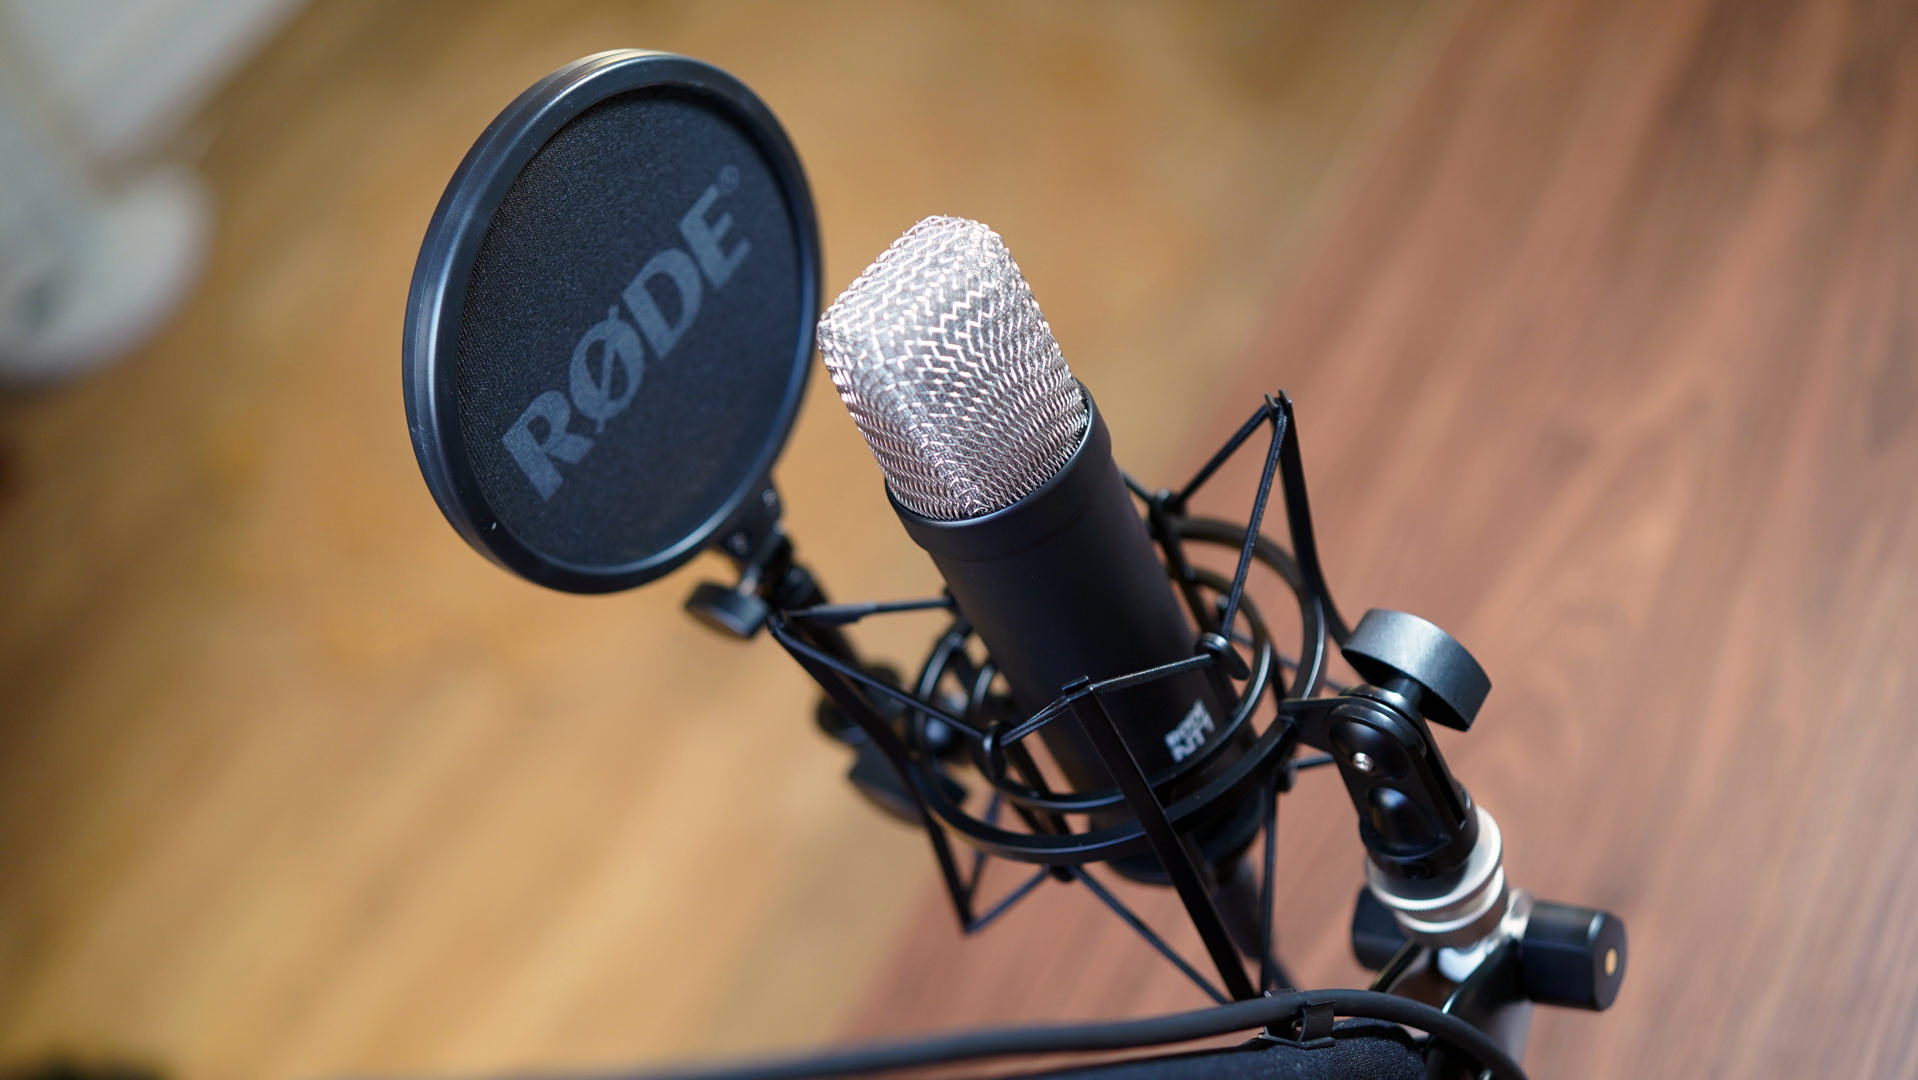 Rode NT1 fifth-gen microphone review: specs, performance, cost